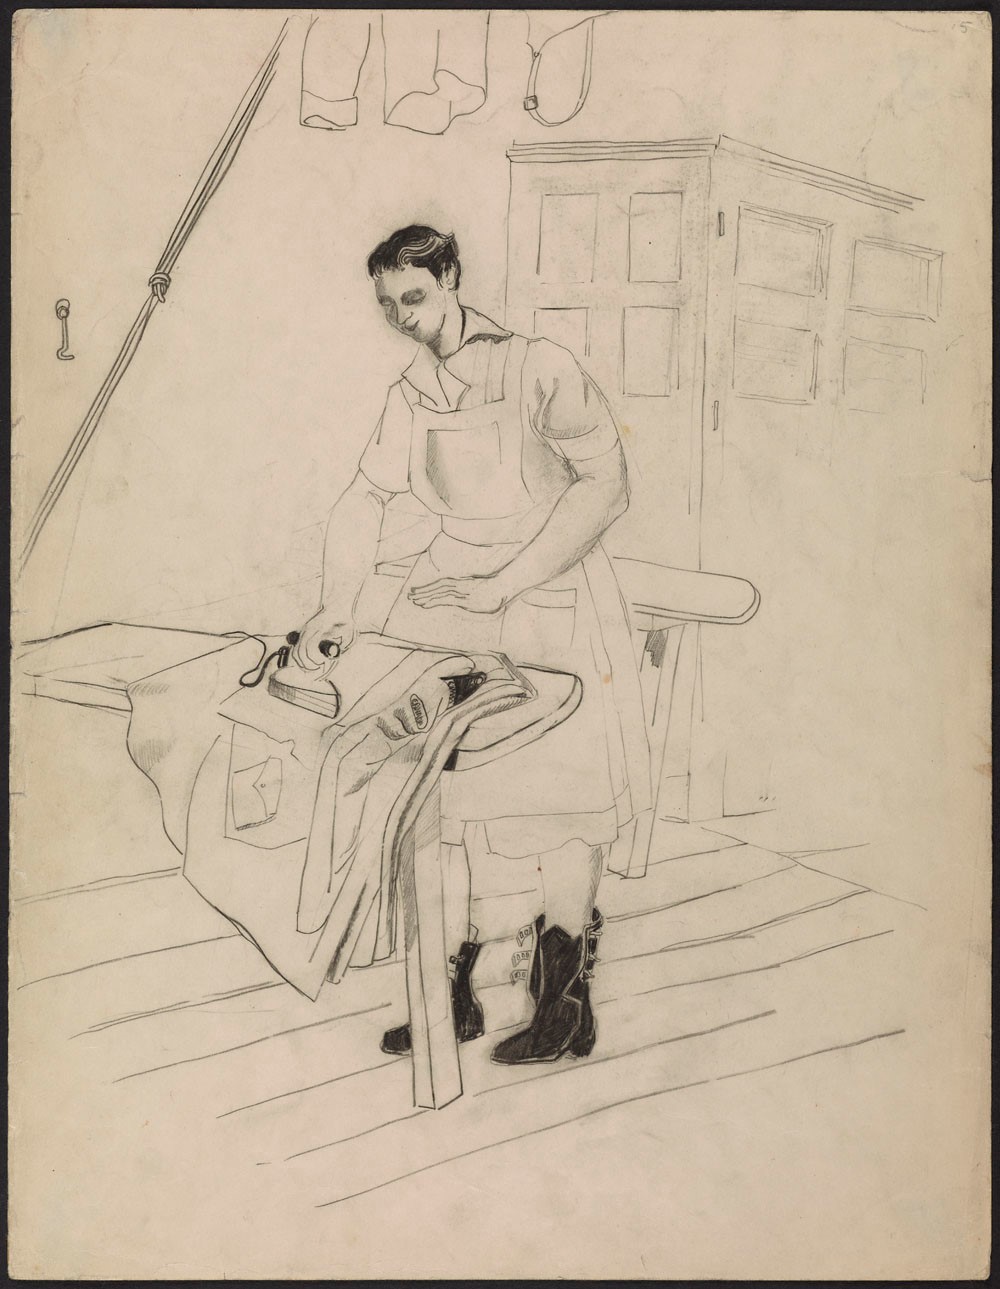 Black and white drawing of a lady dressed in apron and army boots ironing a military coat